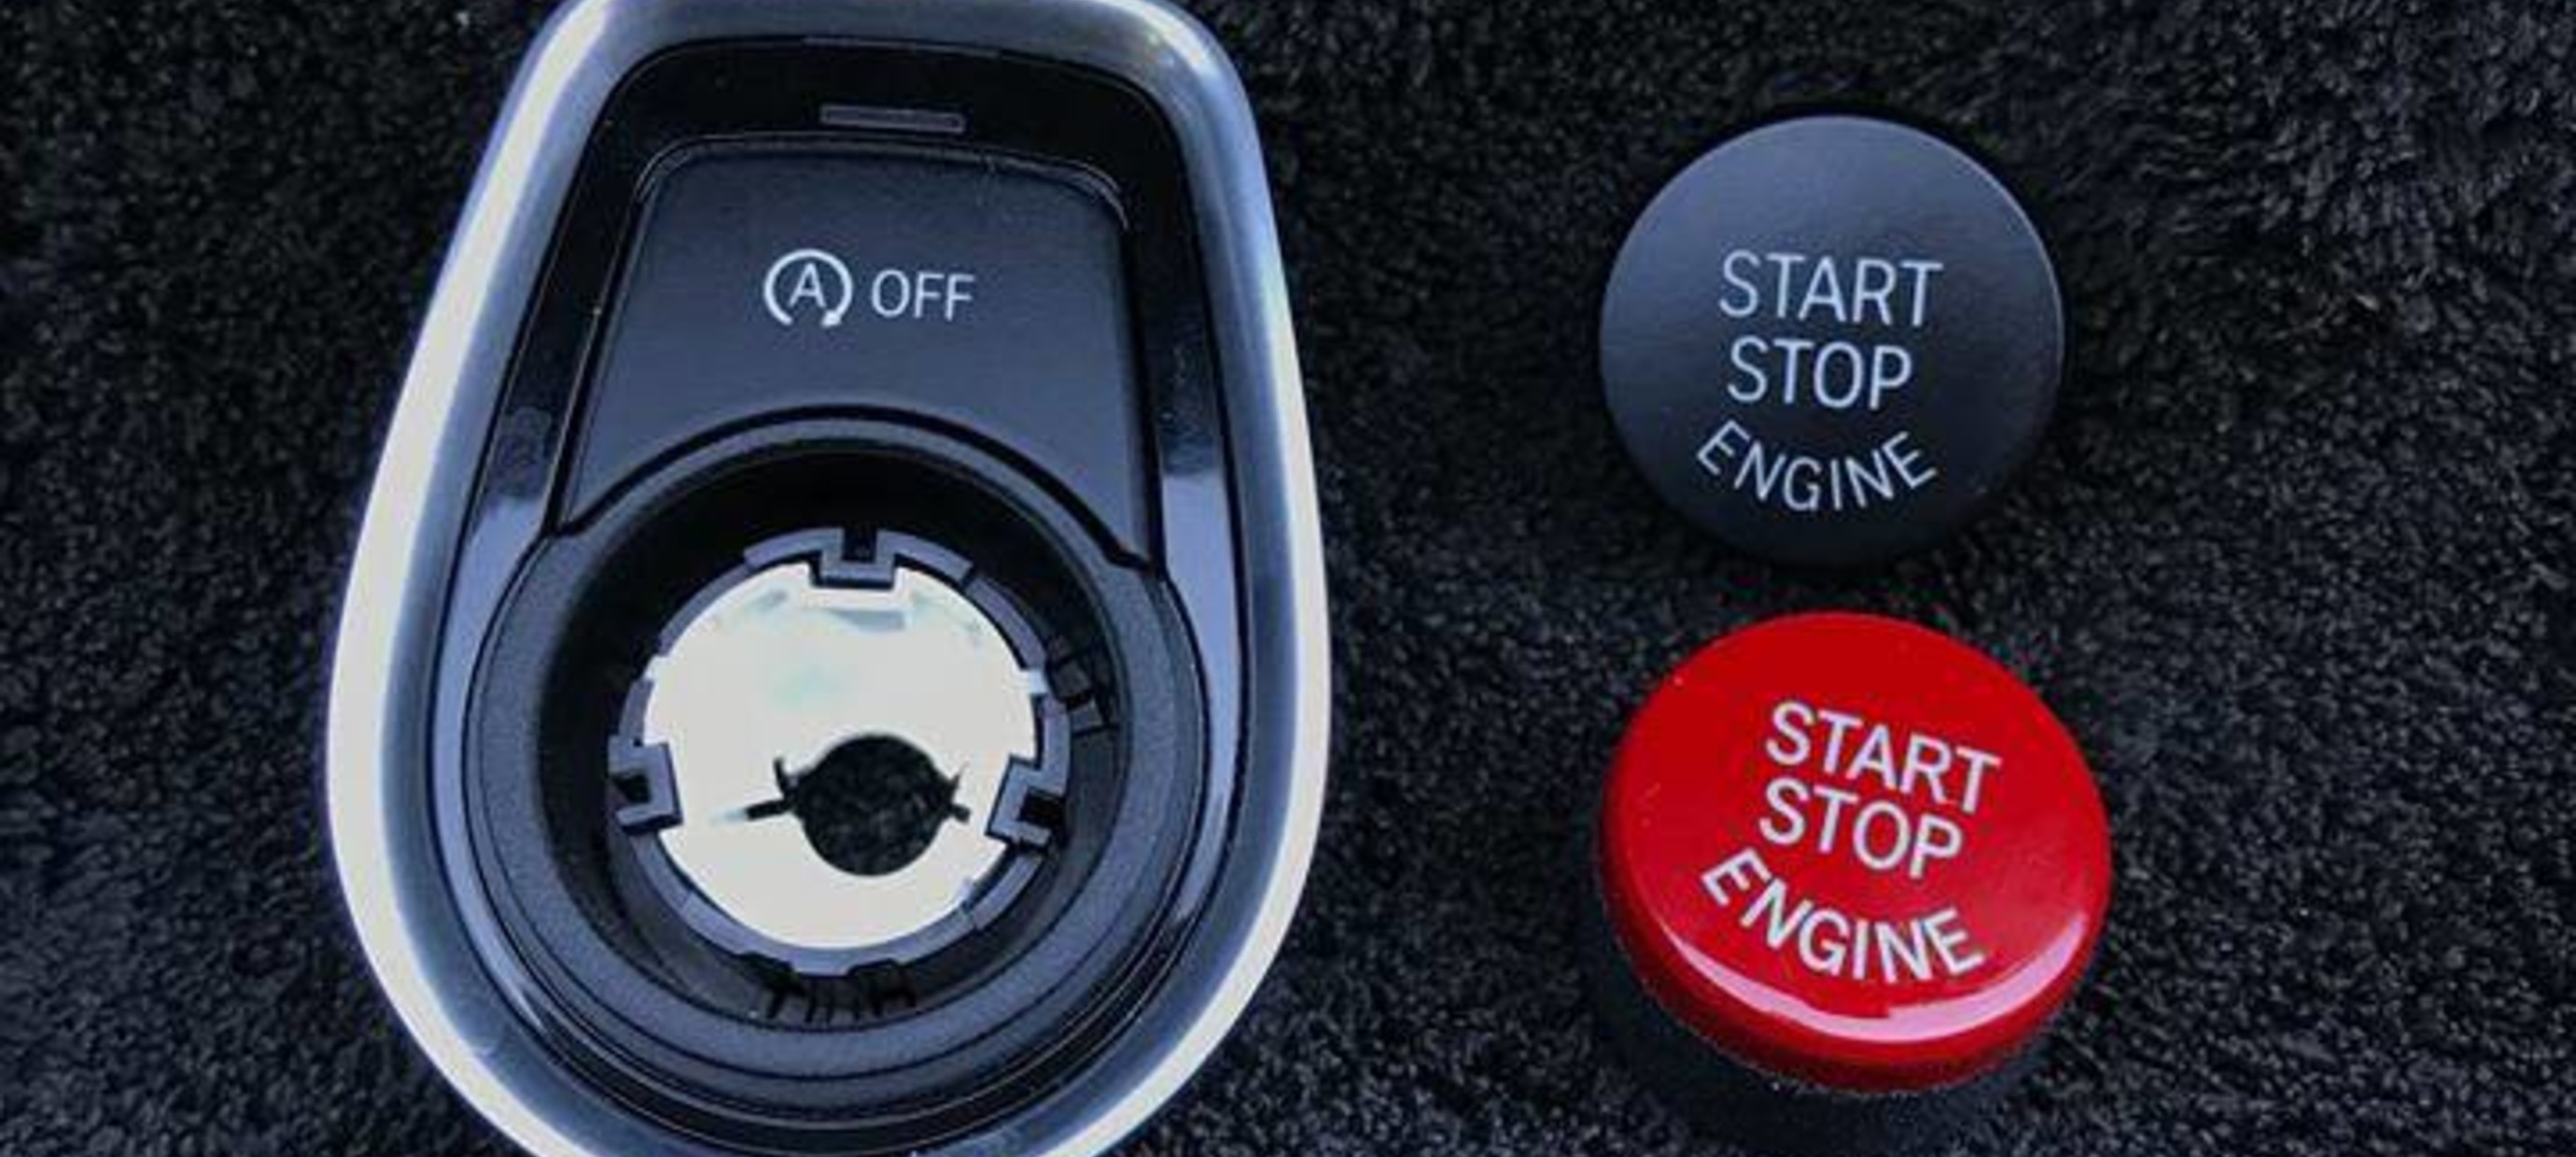 How to fit red start/stop button